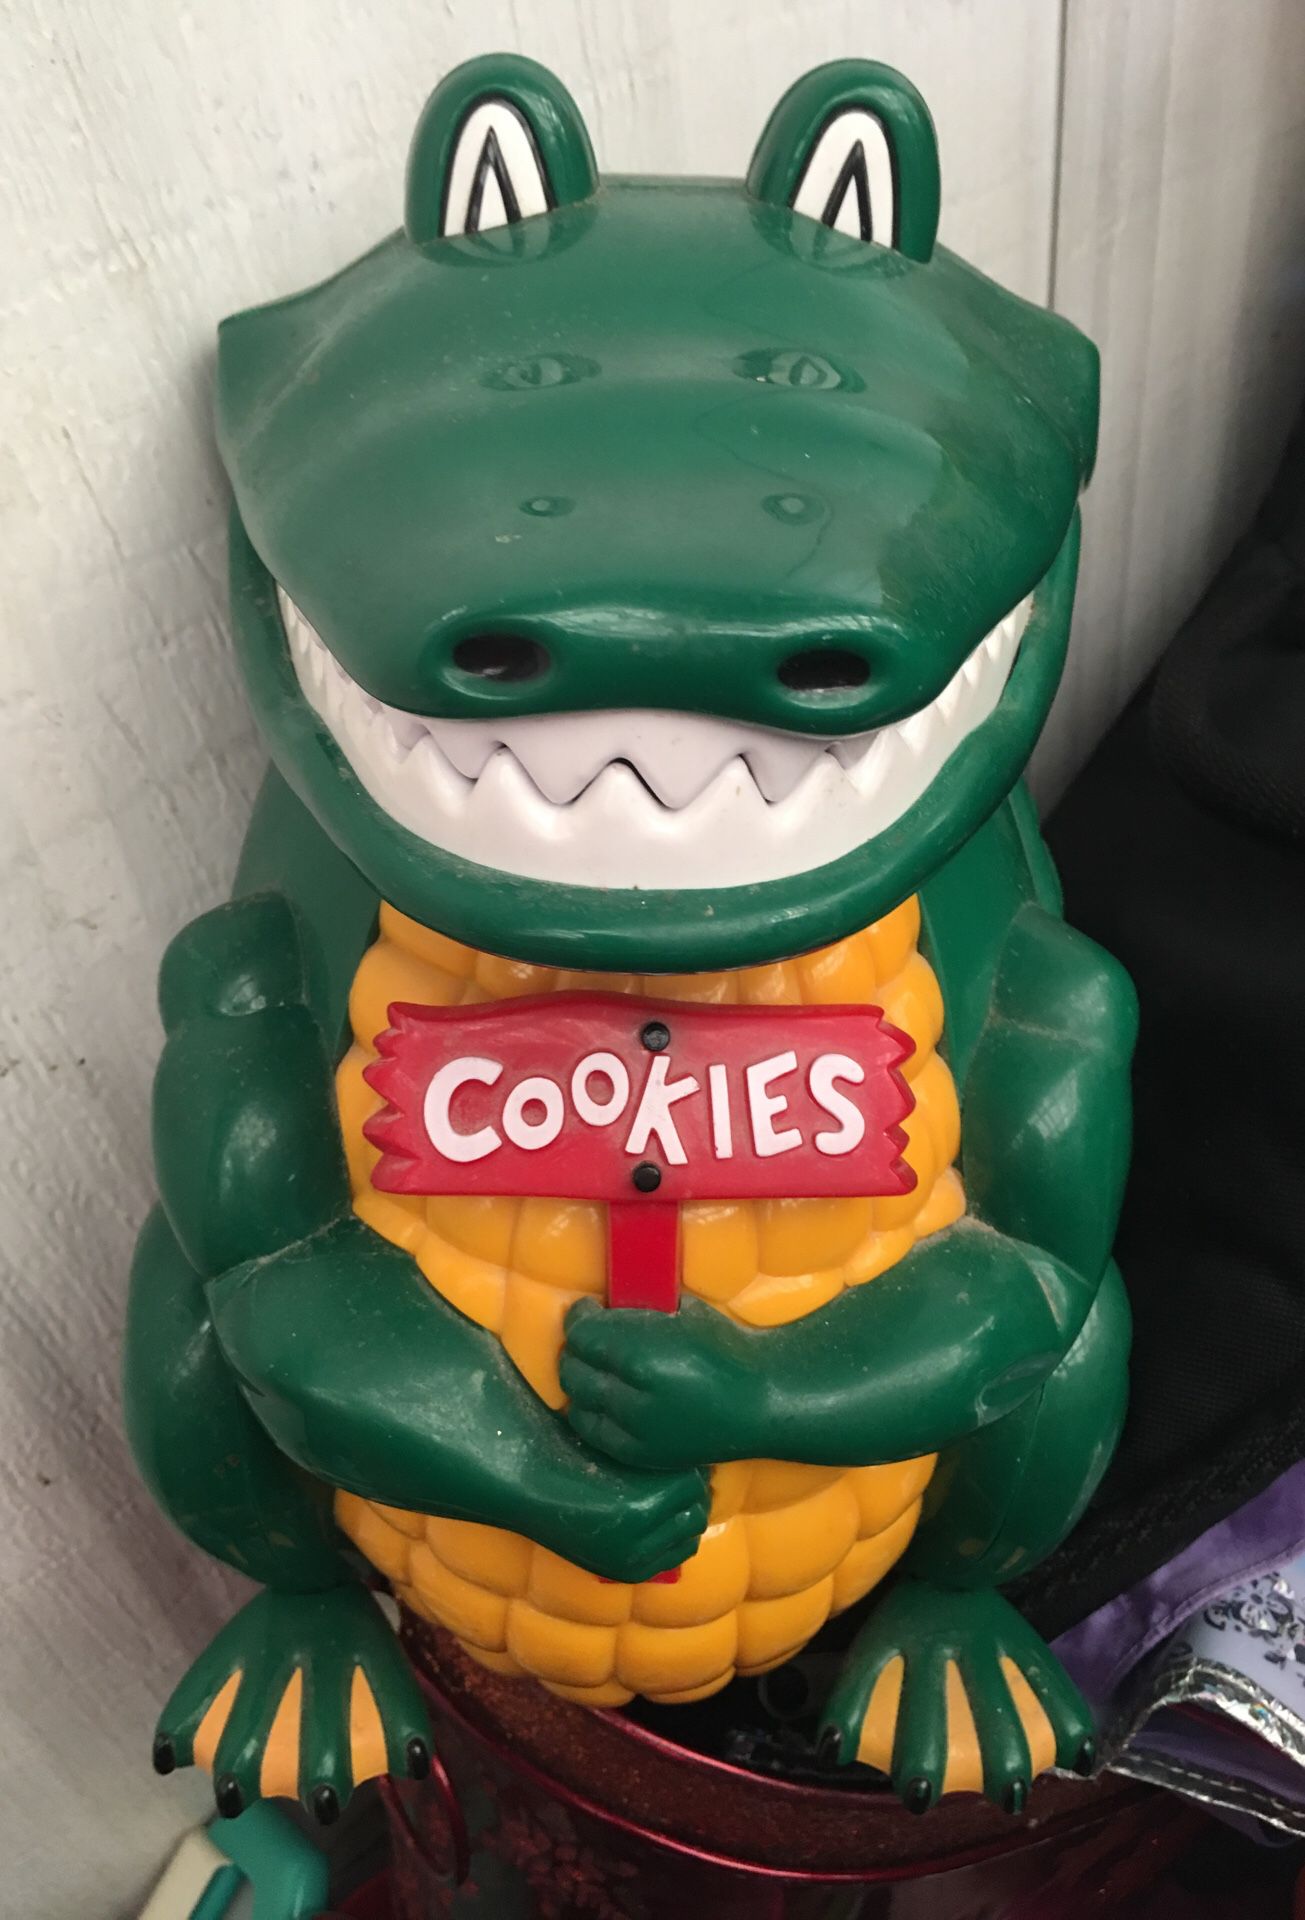 Cookies jar great for kids cooking and makes sounds